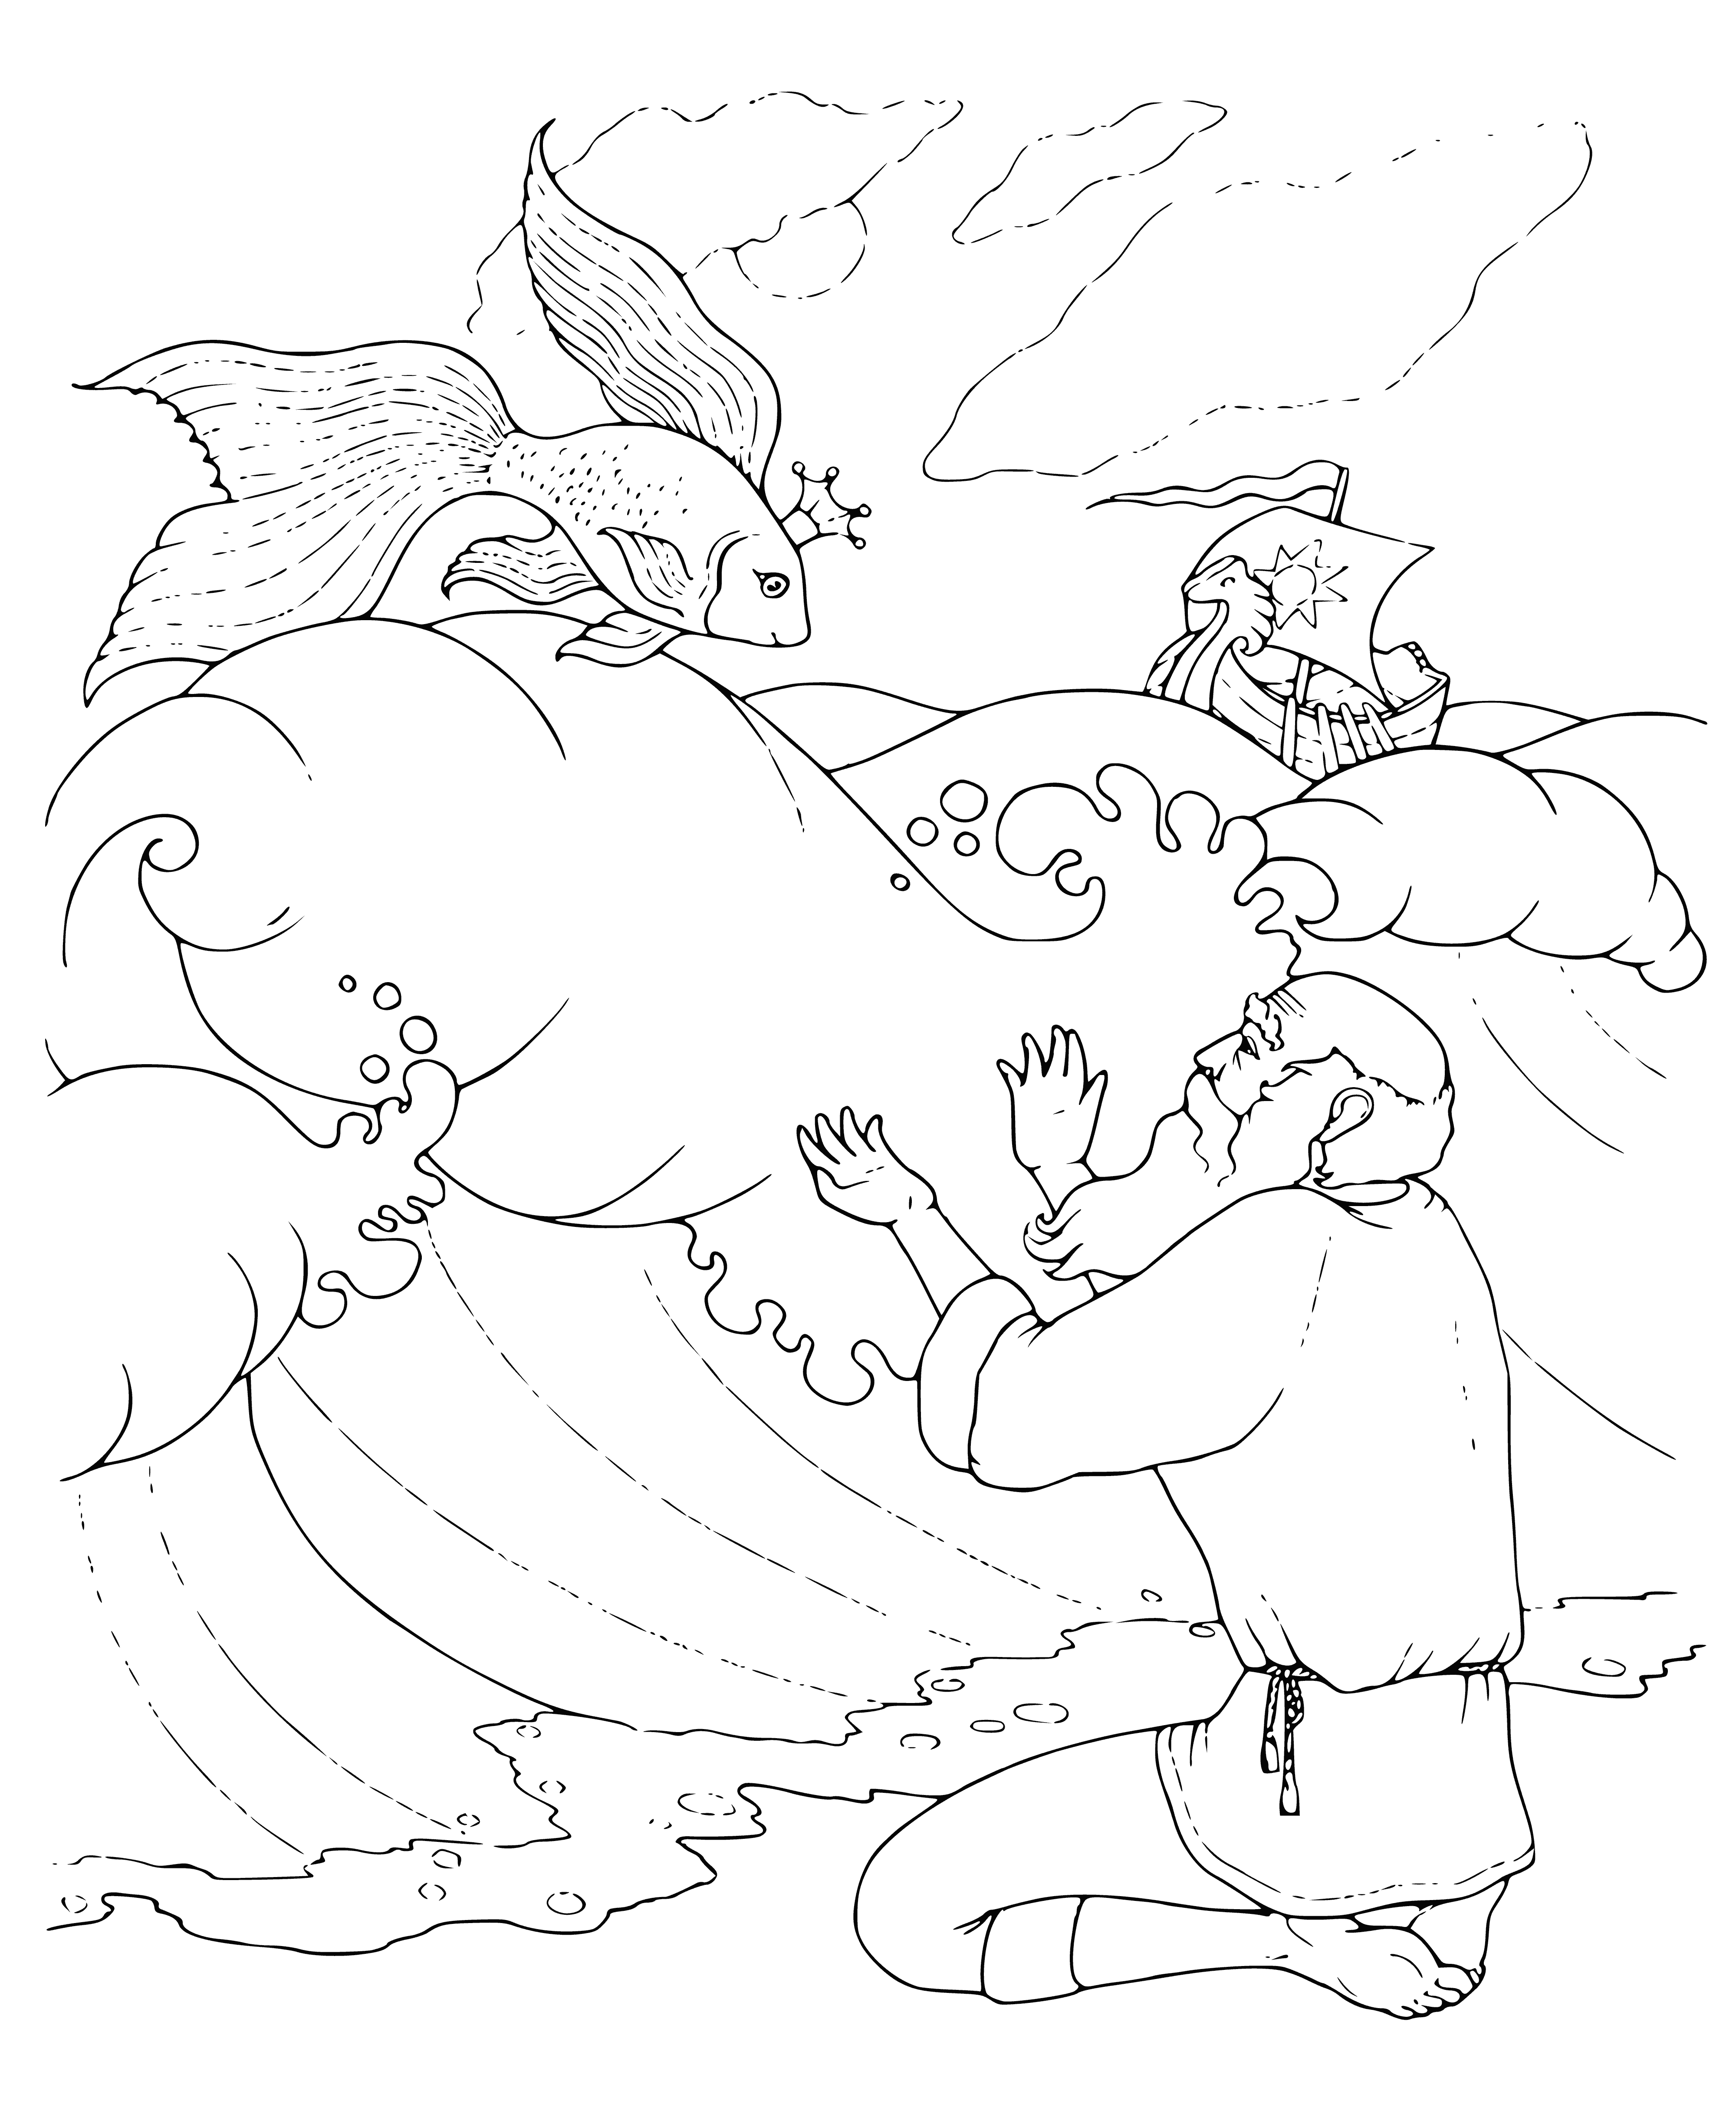 coloring page: Old man surprises as goldfish swims near him, arms & legs crossed, wearing robe & beard.